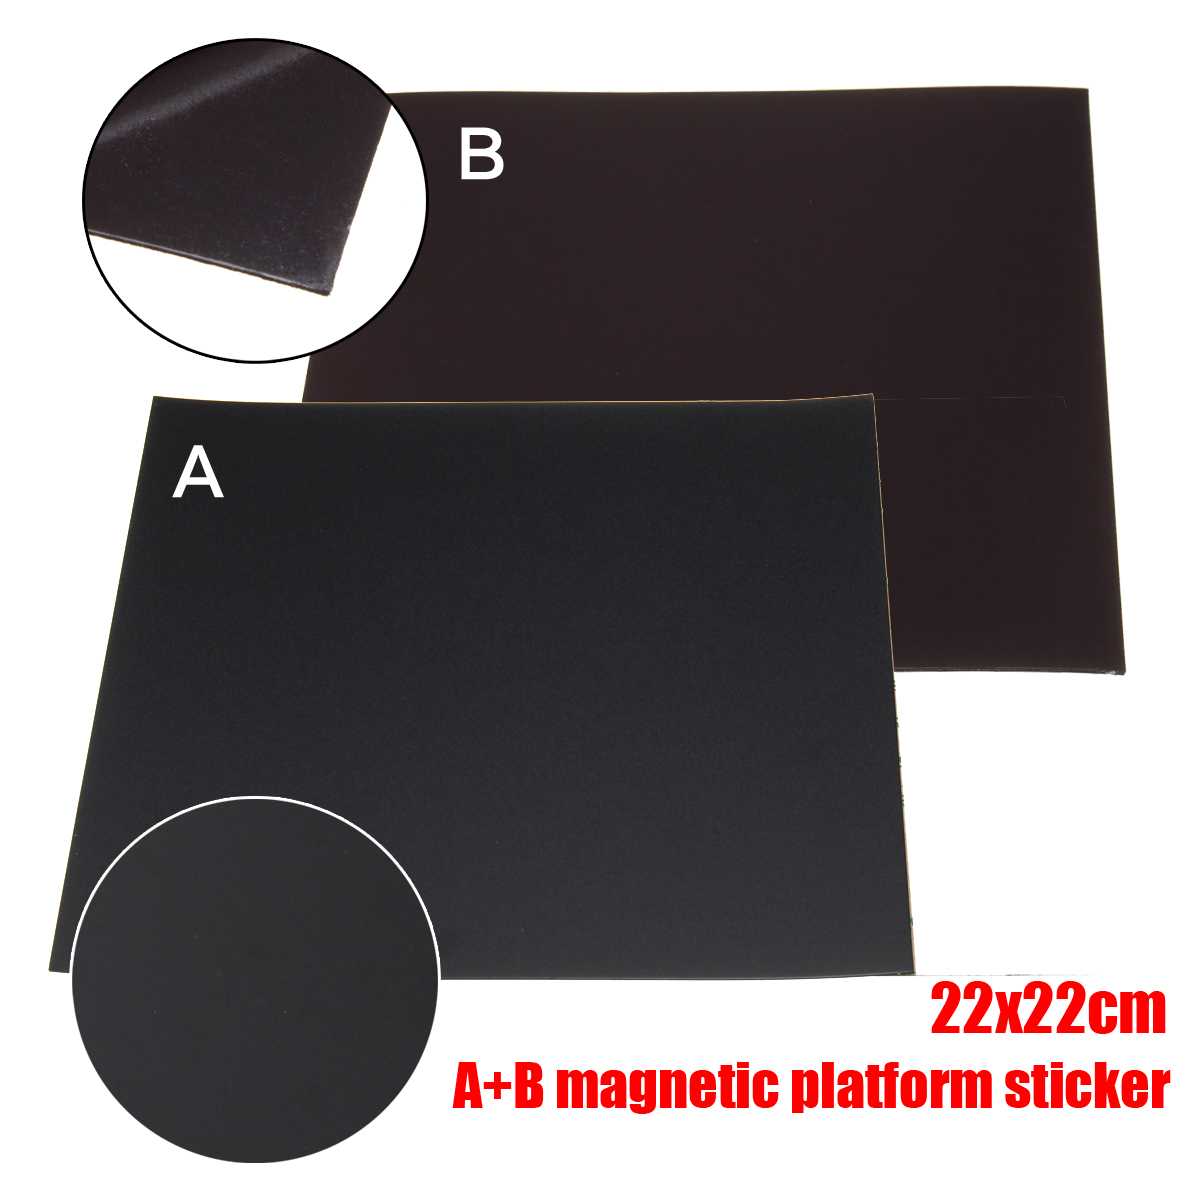 22x22cm A+B Magnetic Sheet Surface Platform Sticker For 3D Printer Creality Ender-3 Heated Bed 11